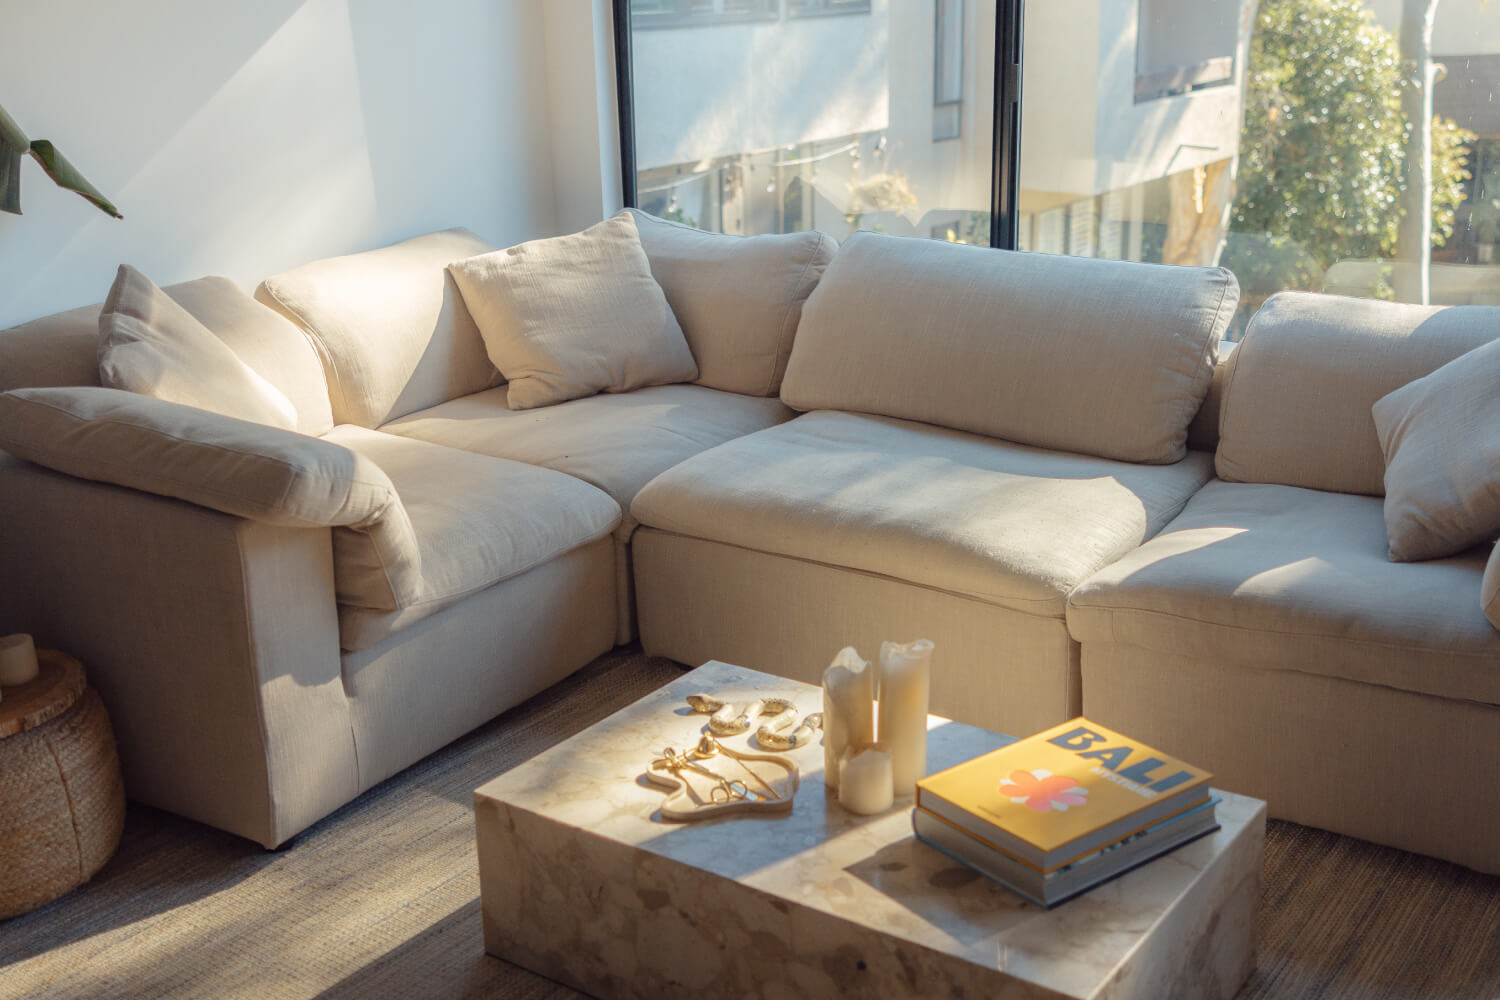 The EM Sky Sofa in a bright living room bathed in natural light, with plush cushions inviting relaxation.